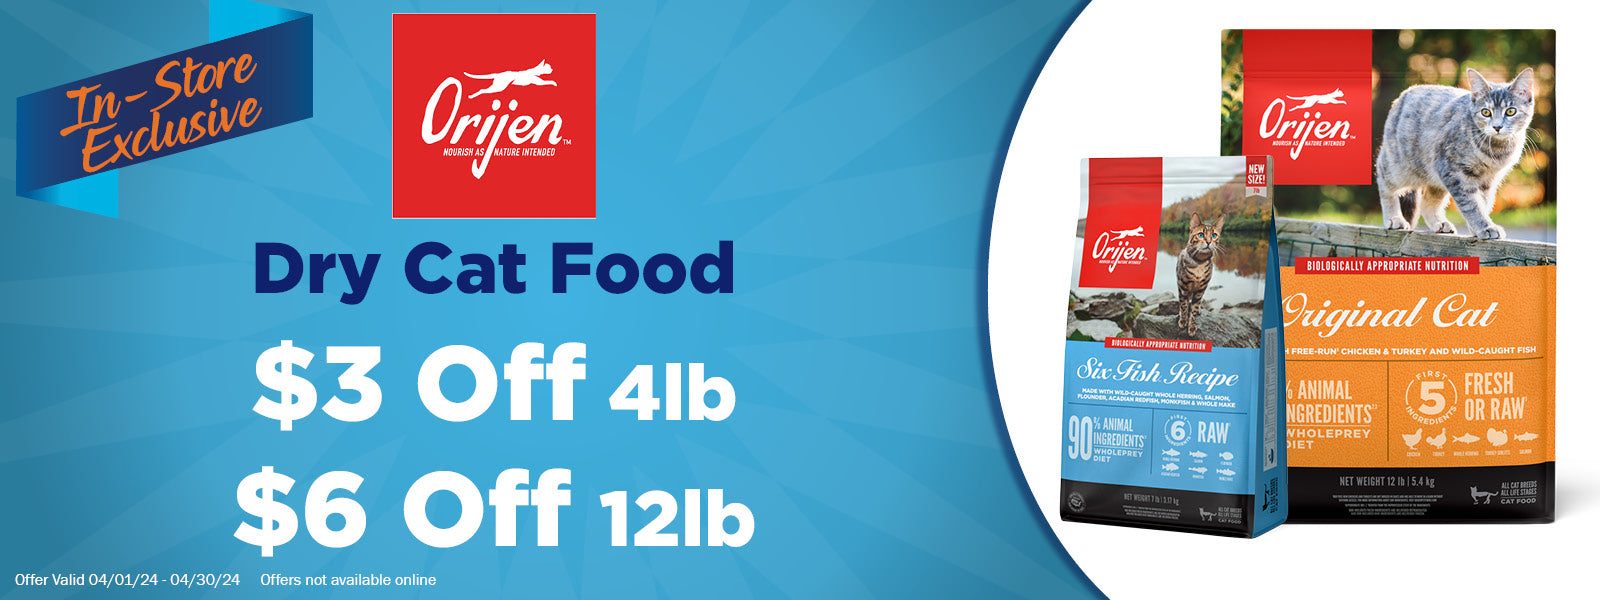 In-Store Exclusive Offer - Orijen Dry Cat Food up to $6 Off